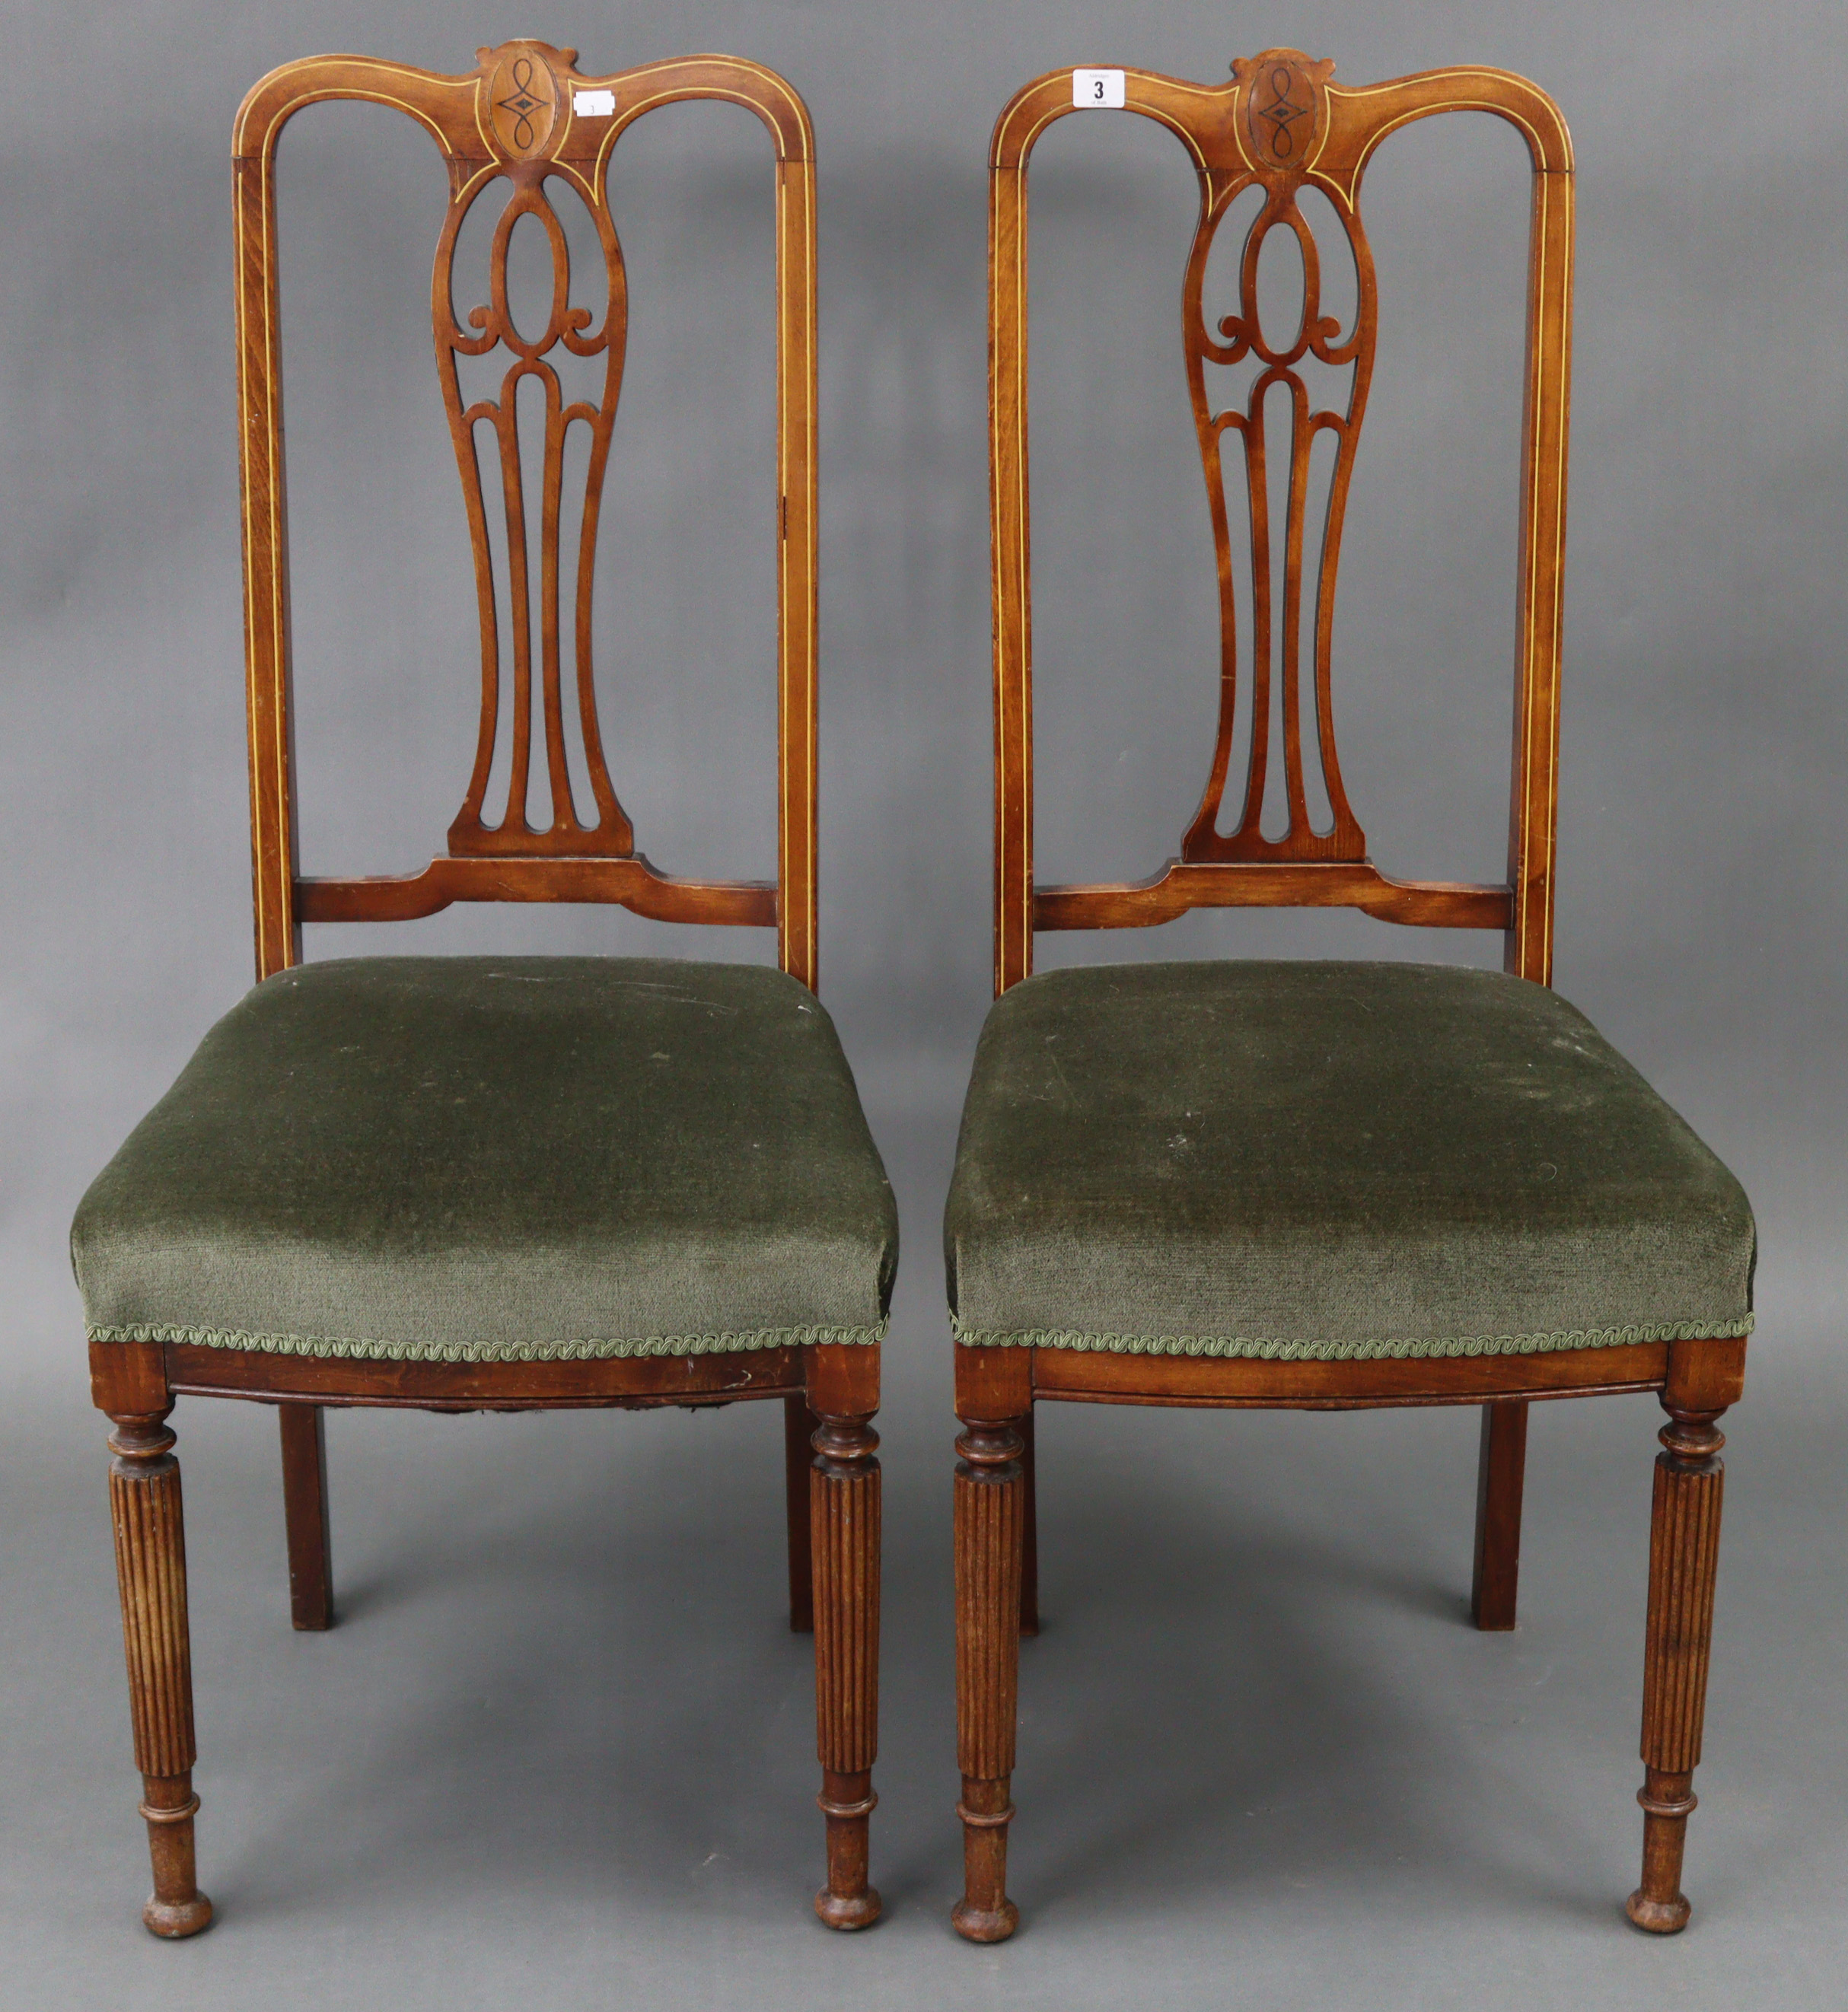 A pair of late 19th/early 20th century inlaid-mahogany splat-back occasional chairs with padded